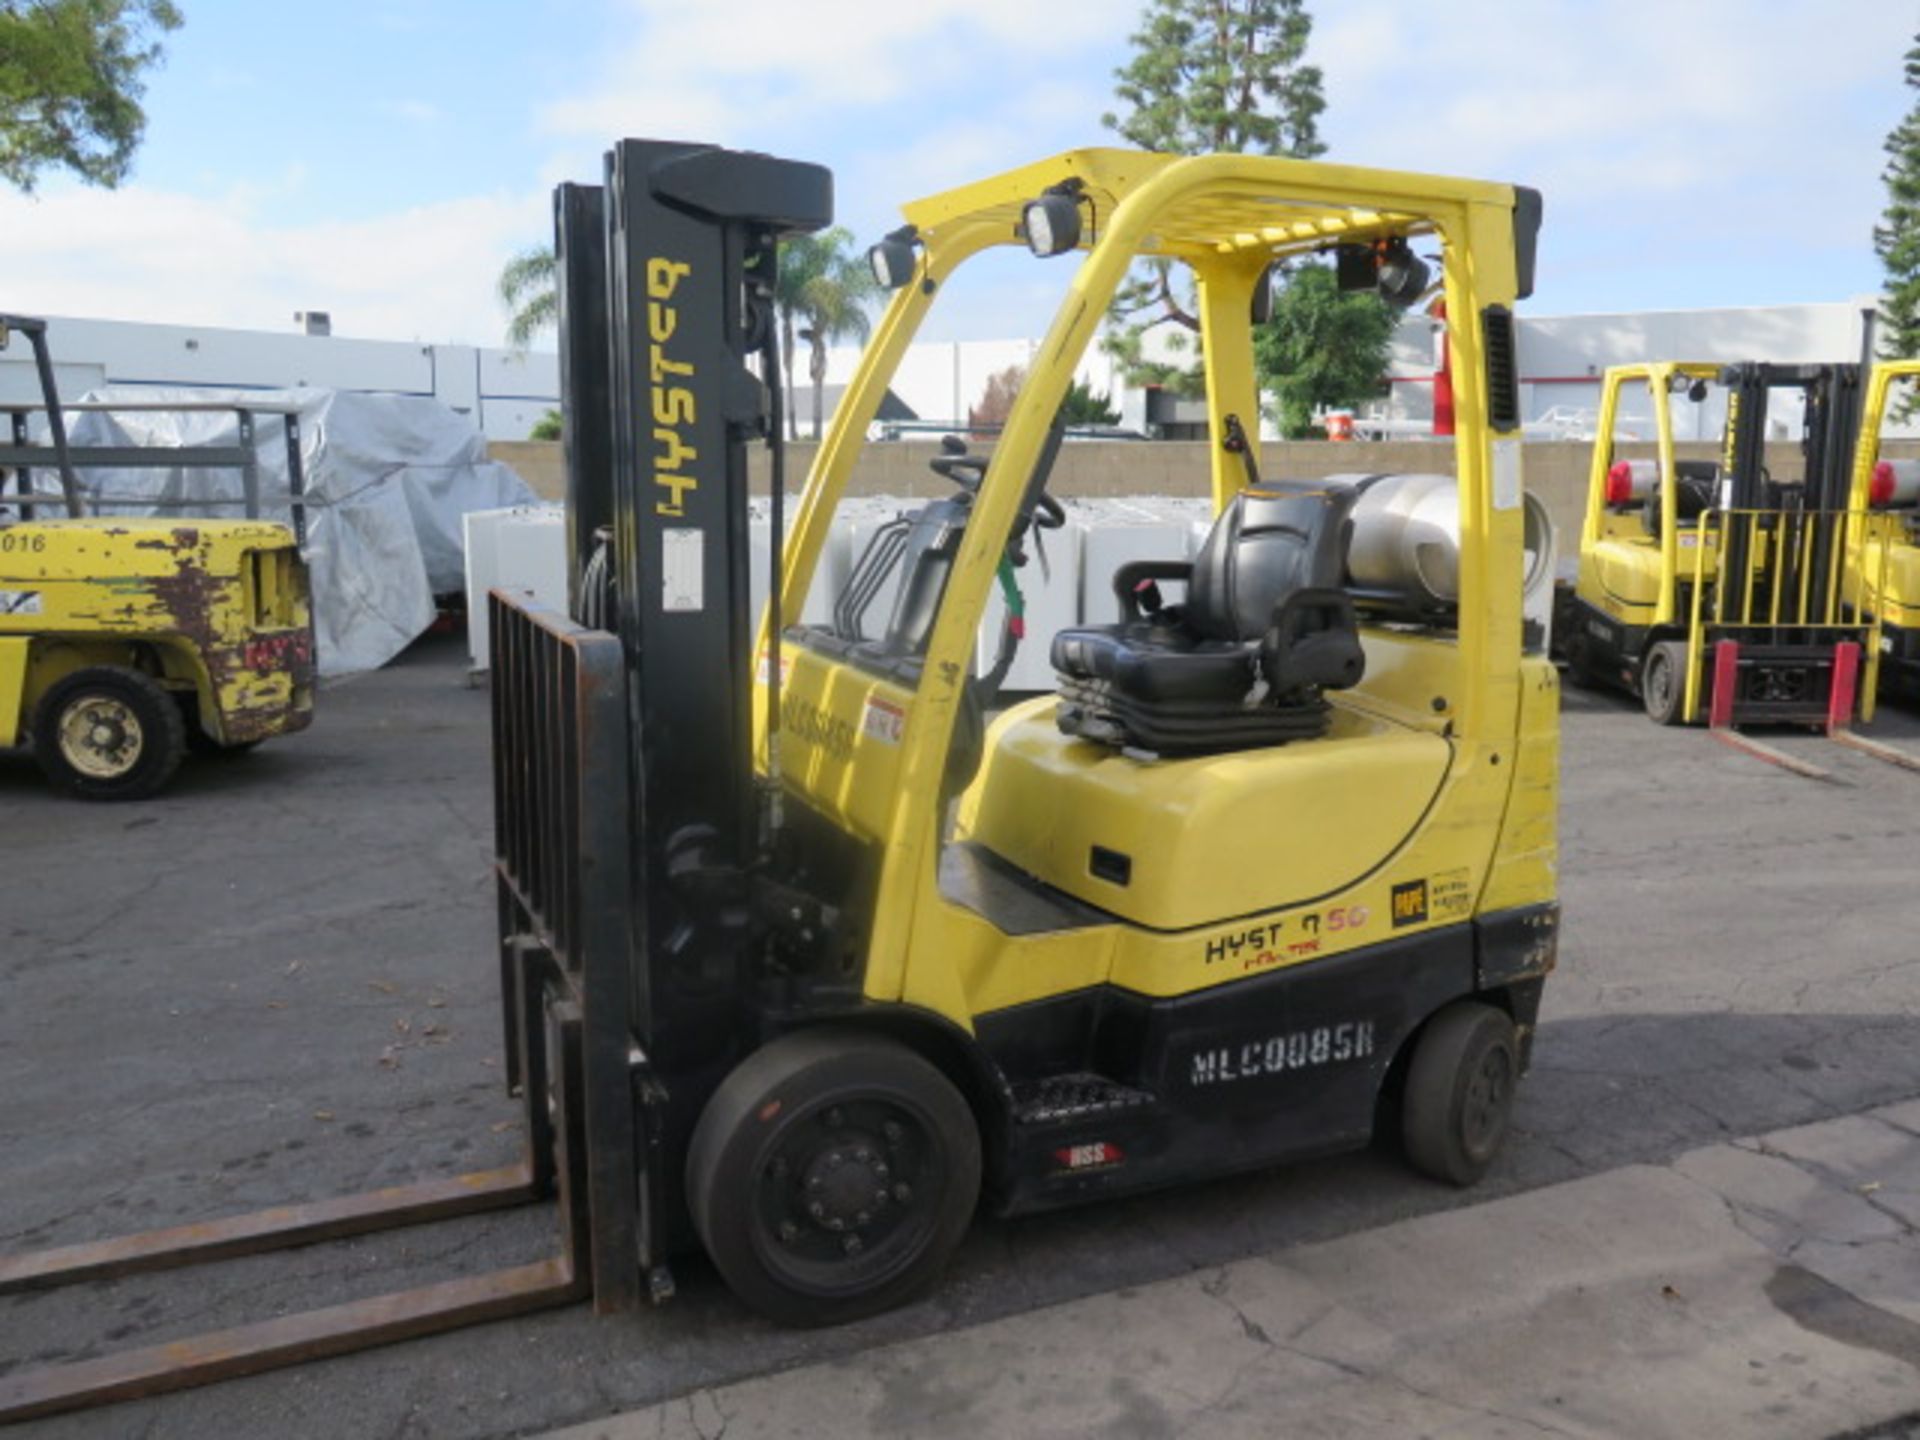 2016 Hyster S50FT 5000 Lb Cap LPG Forklift s/n H187V05054P, 3-Stage Mast, 189” Lift, SOLD AS IS